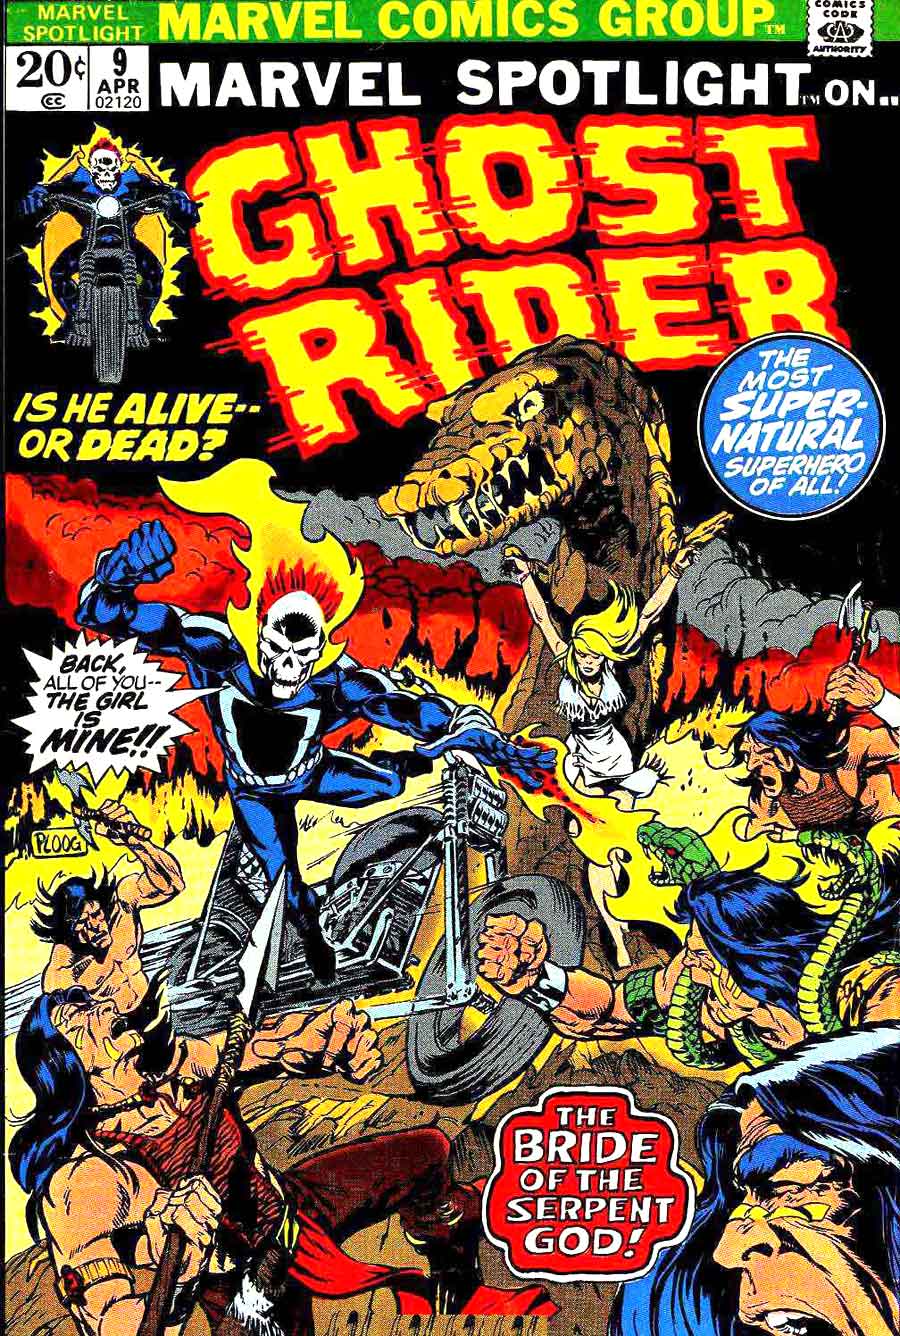 Marvel Spotlight #9 Ghost Rider / bronze age 1970s marvel comic book cover art by Mike Ploog